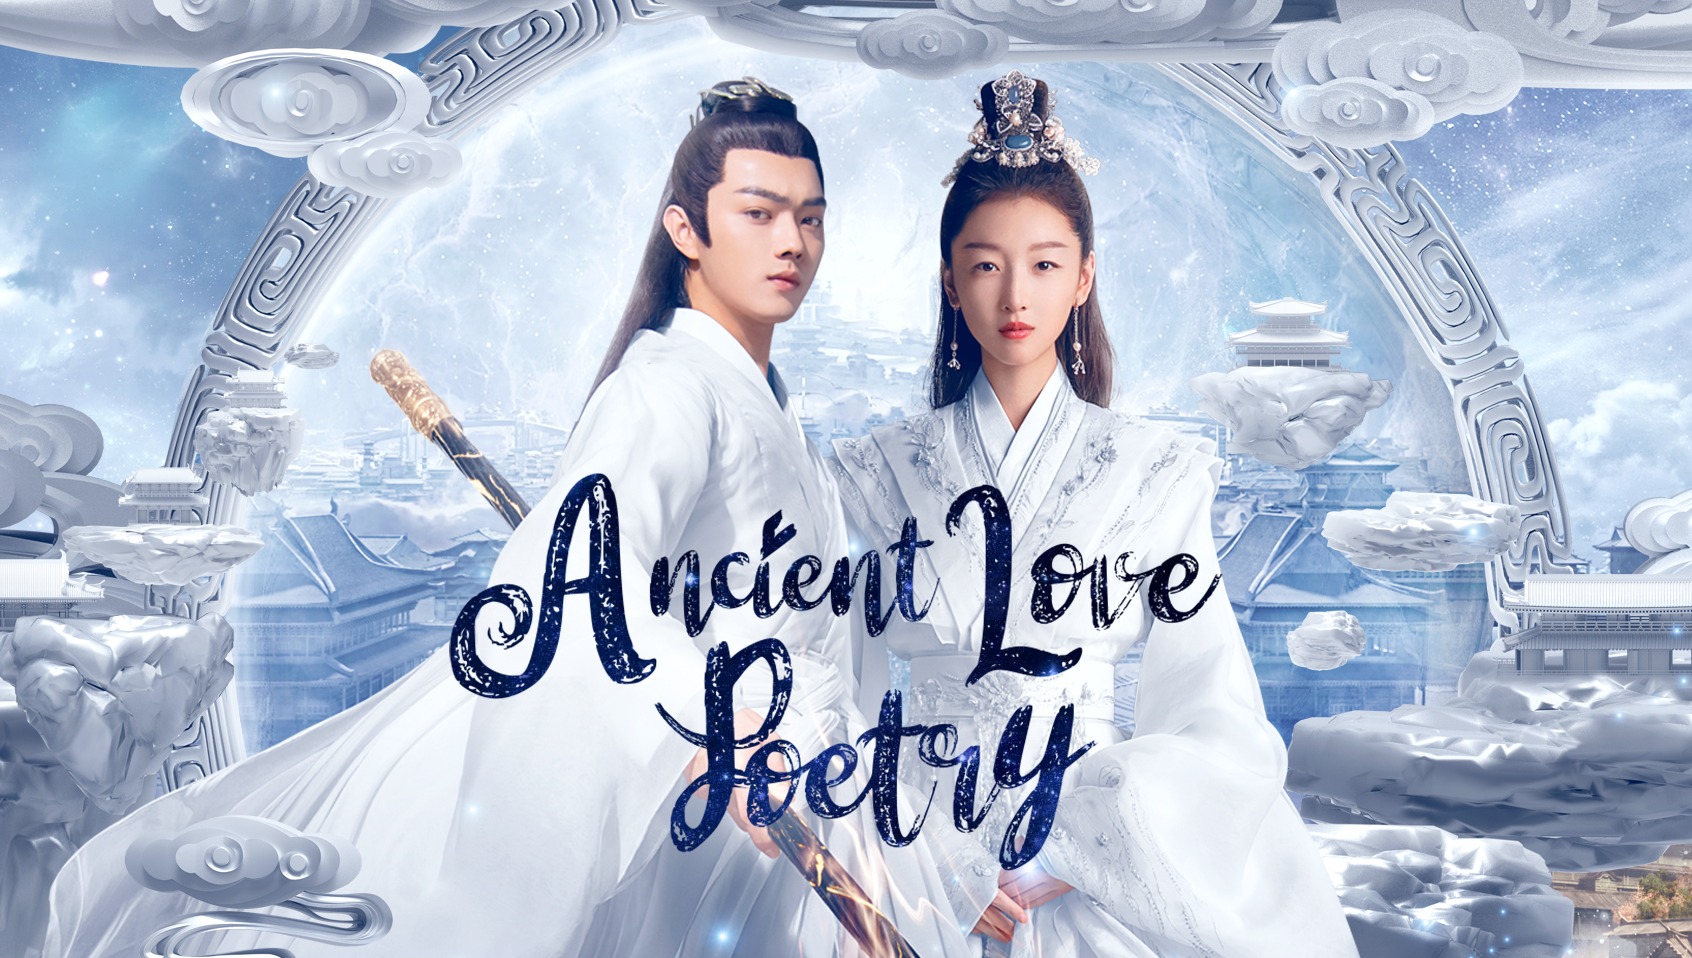 Ancient love poetry cast